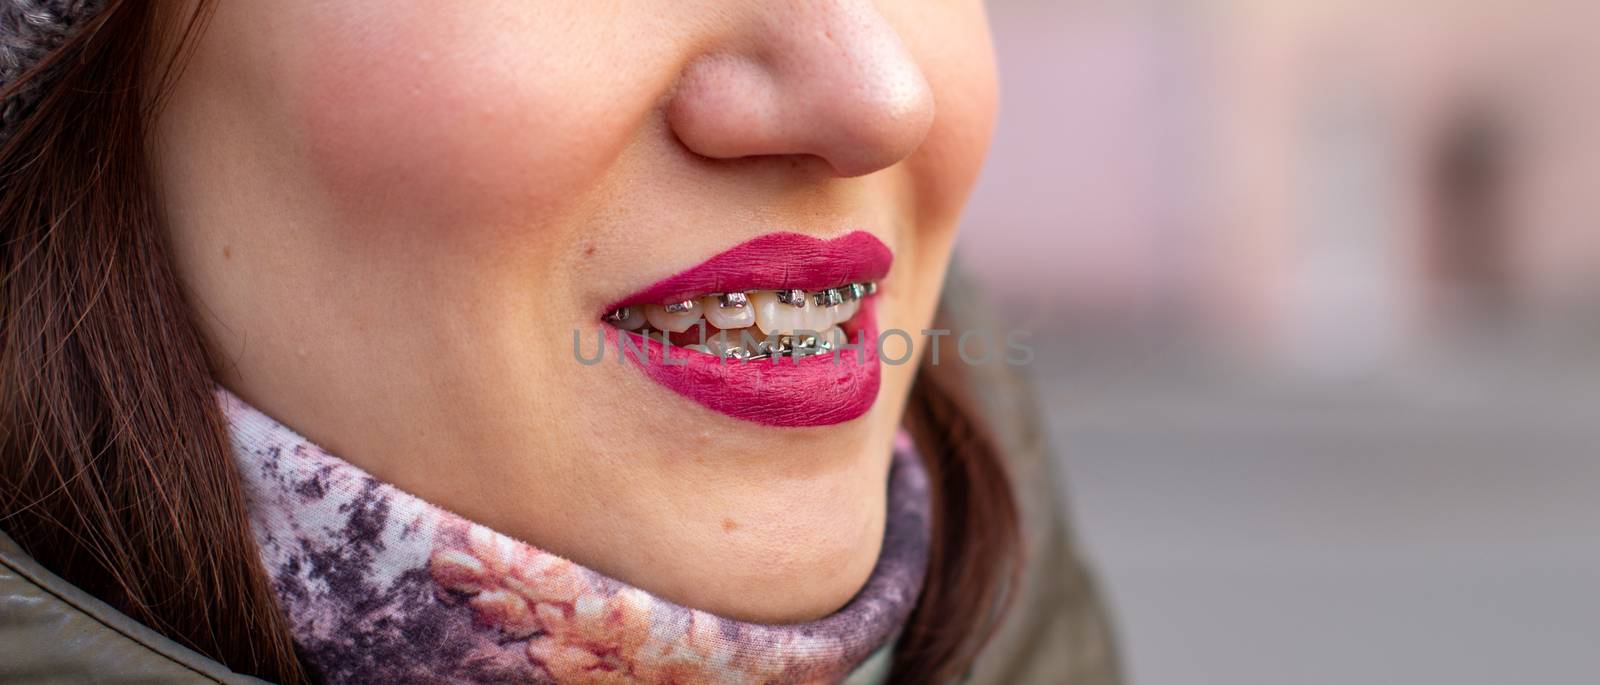 Brasket system in a girl's smiling mouth, macro photography of teeth, close-up of lips